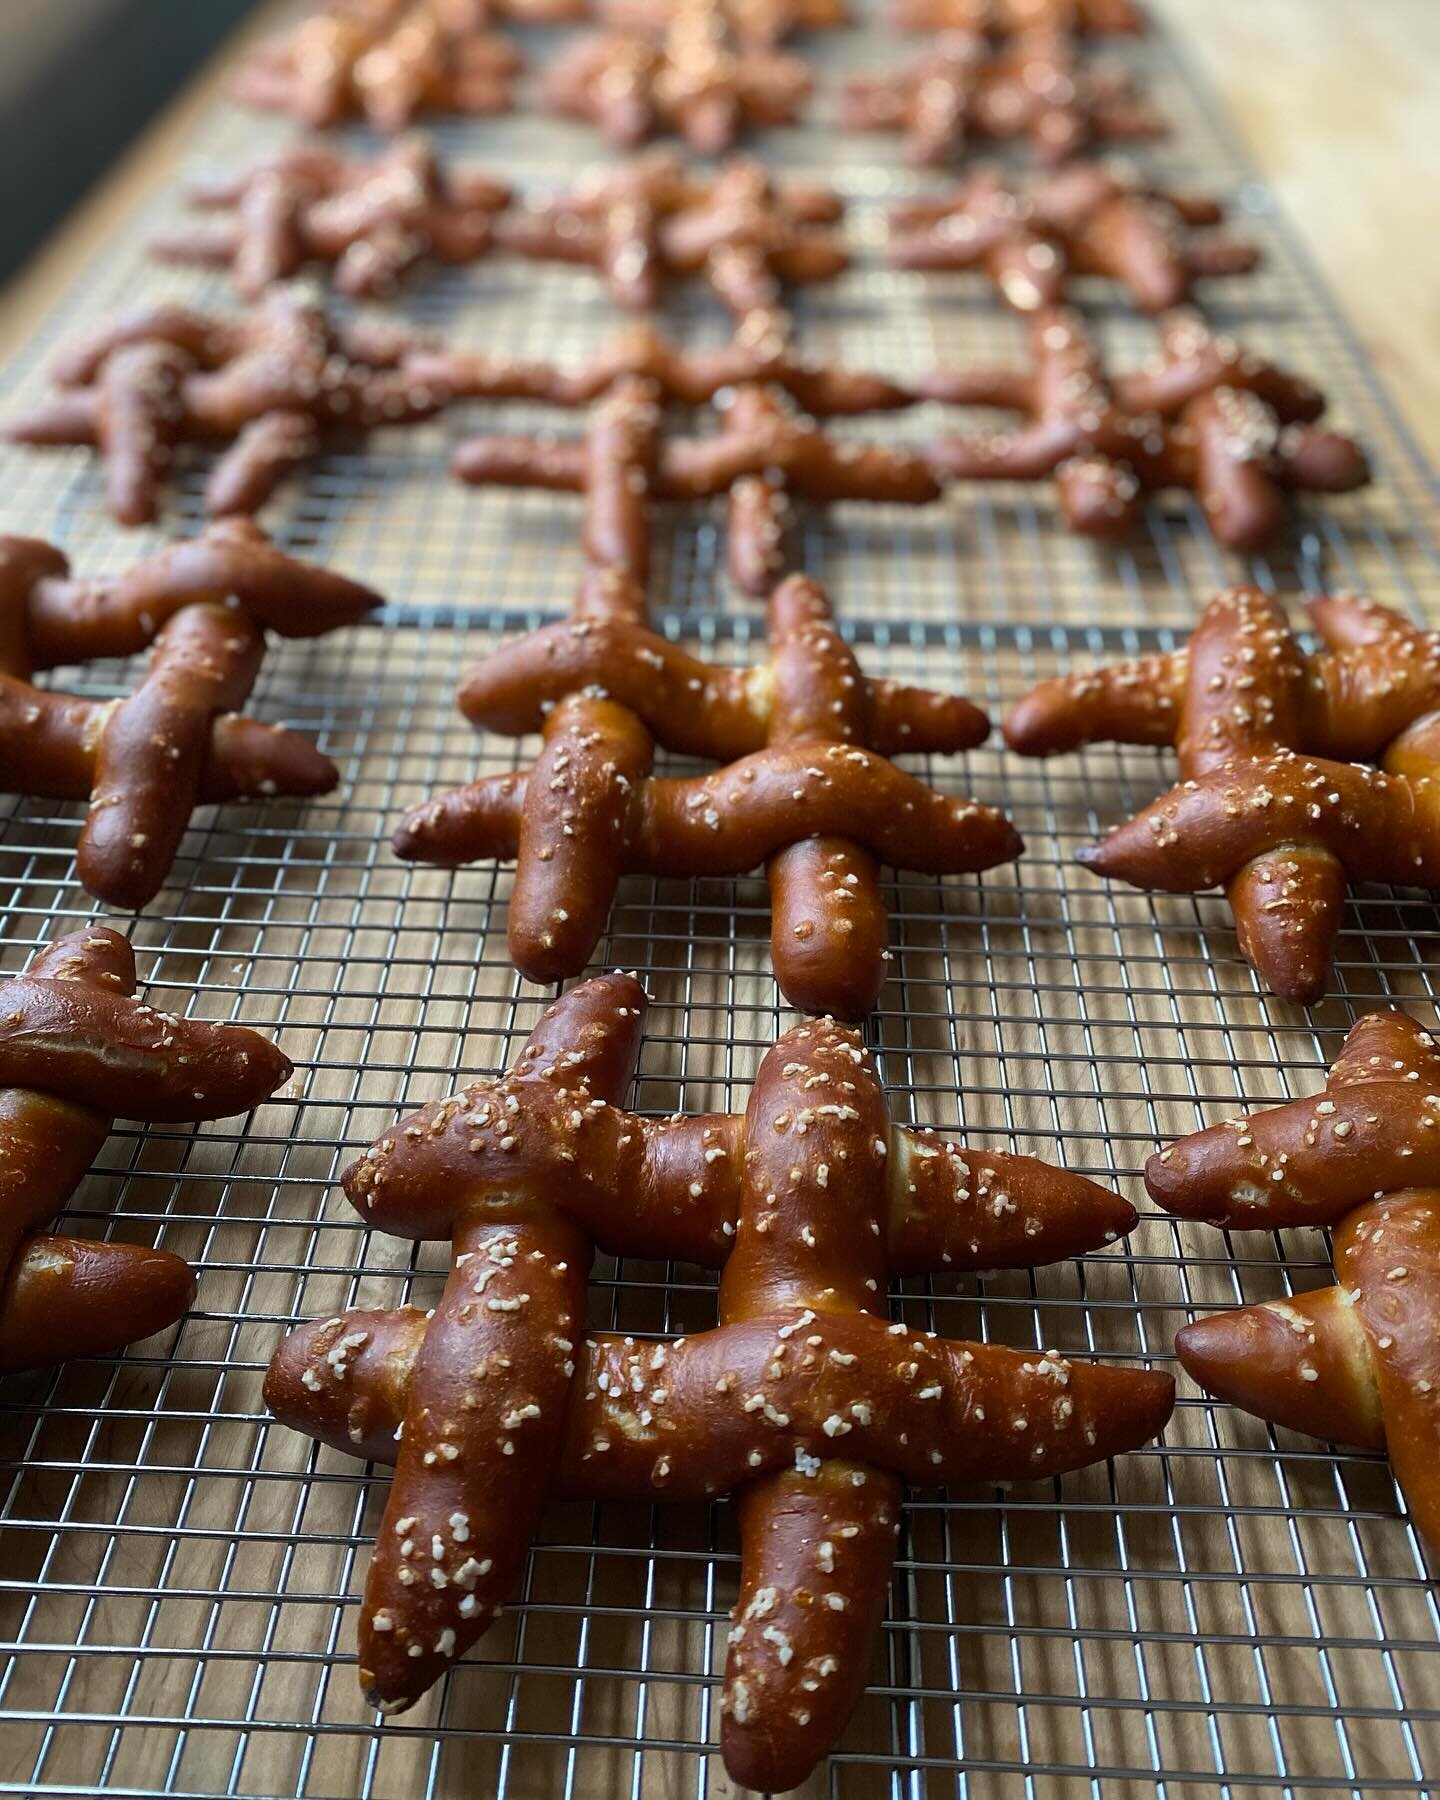 #cc16pretzelproject tonight only! Come down and see what it is all about&hellip;and take a little souvenir home! 

#art
#artmeetsfood
#raleigh 
#downtownraleigh 
@billthelen 
@suzbakesalot